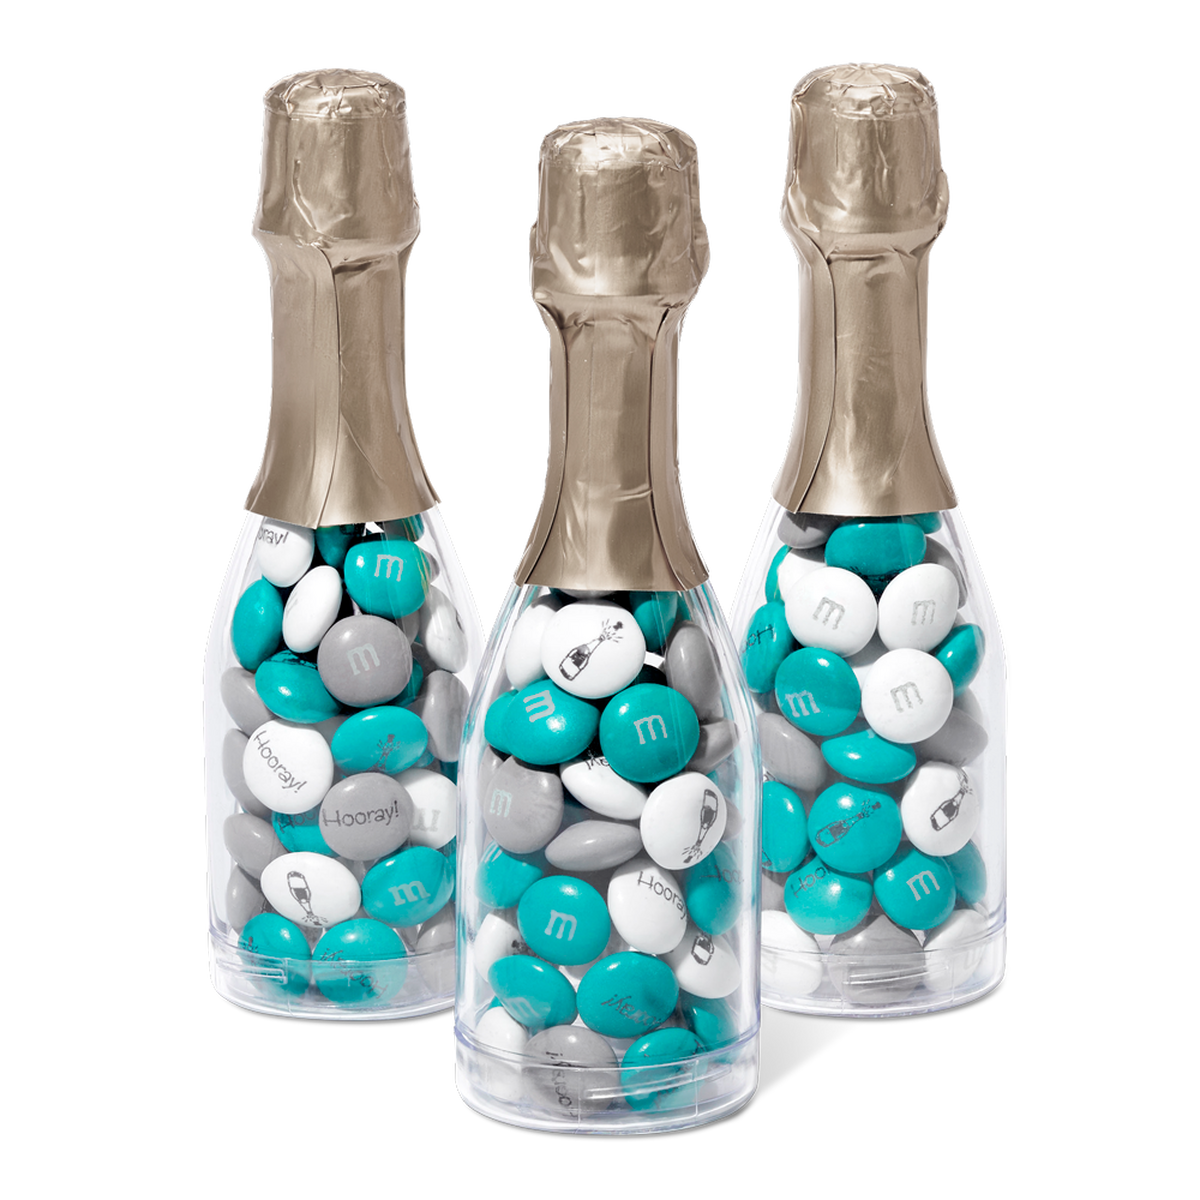 occasion bottles as placeholder